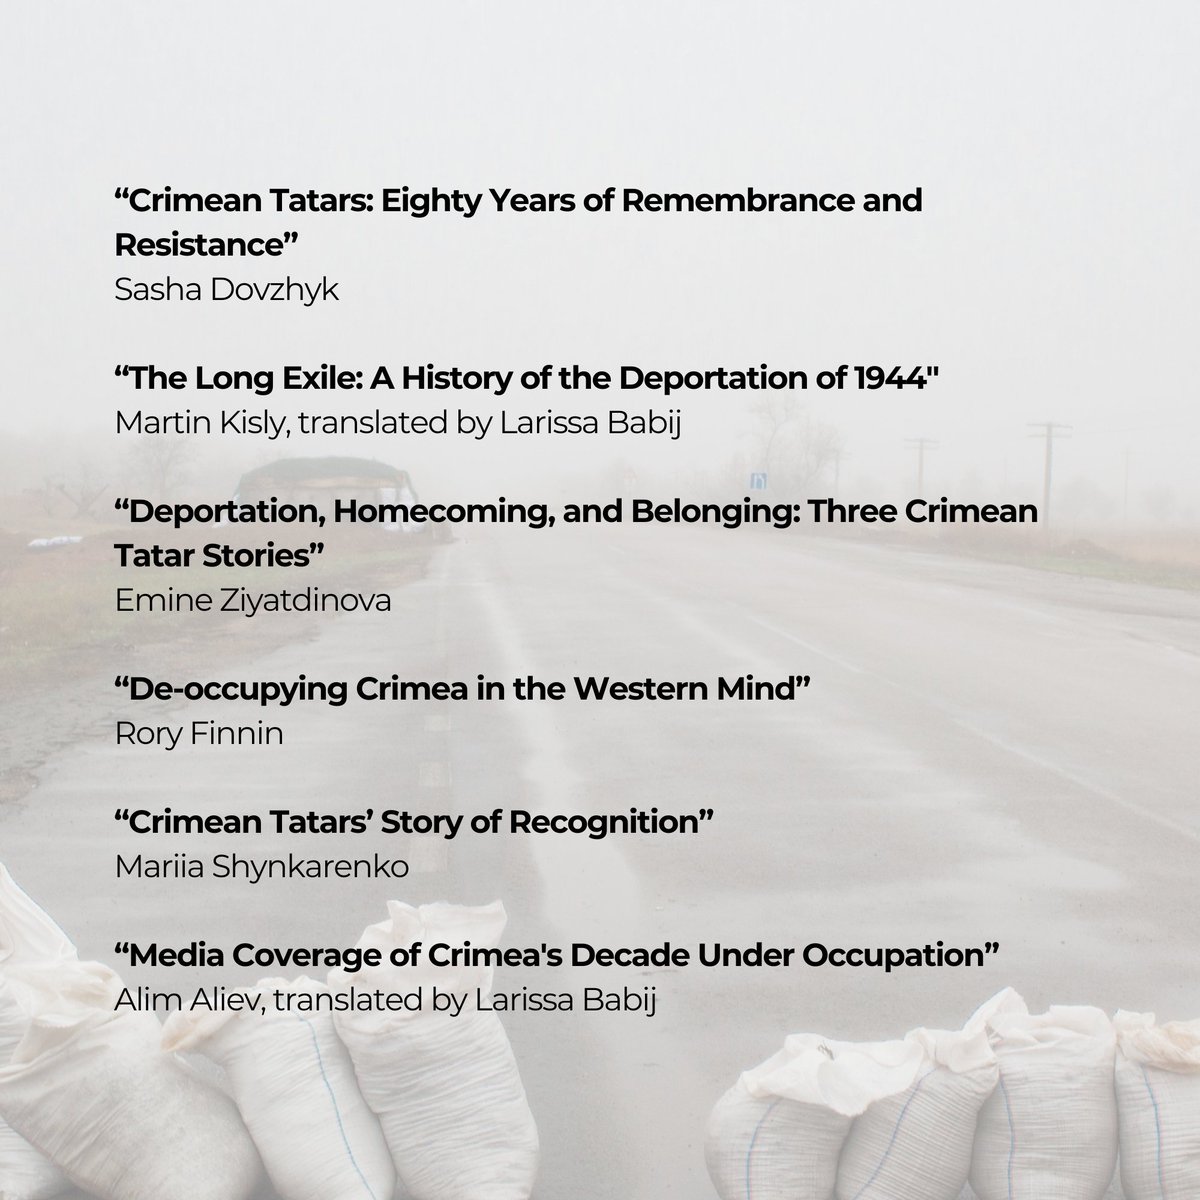 🔹New Issue Alert: Crimean Tatars: Eighty Years of Remembrance and Resistance 🔸For the 80th anniversary of the Soviet deportation of Crimean Tatars, @ukrlondonreview dedicates its issue to the Russia-occupied Crimean peninsula and its Indigenous people’s fight for justice.